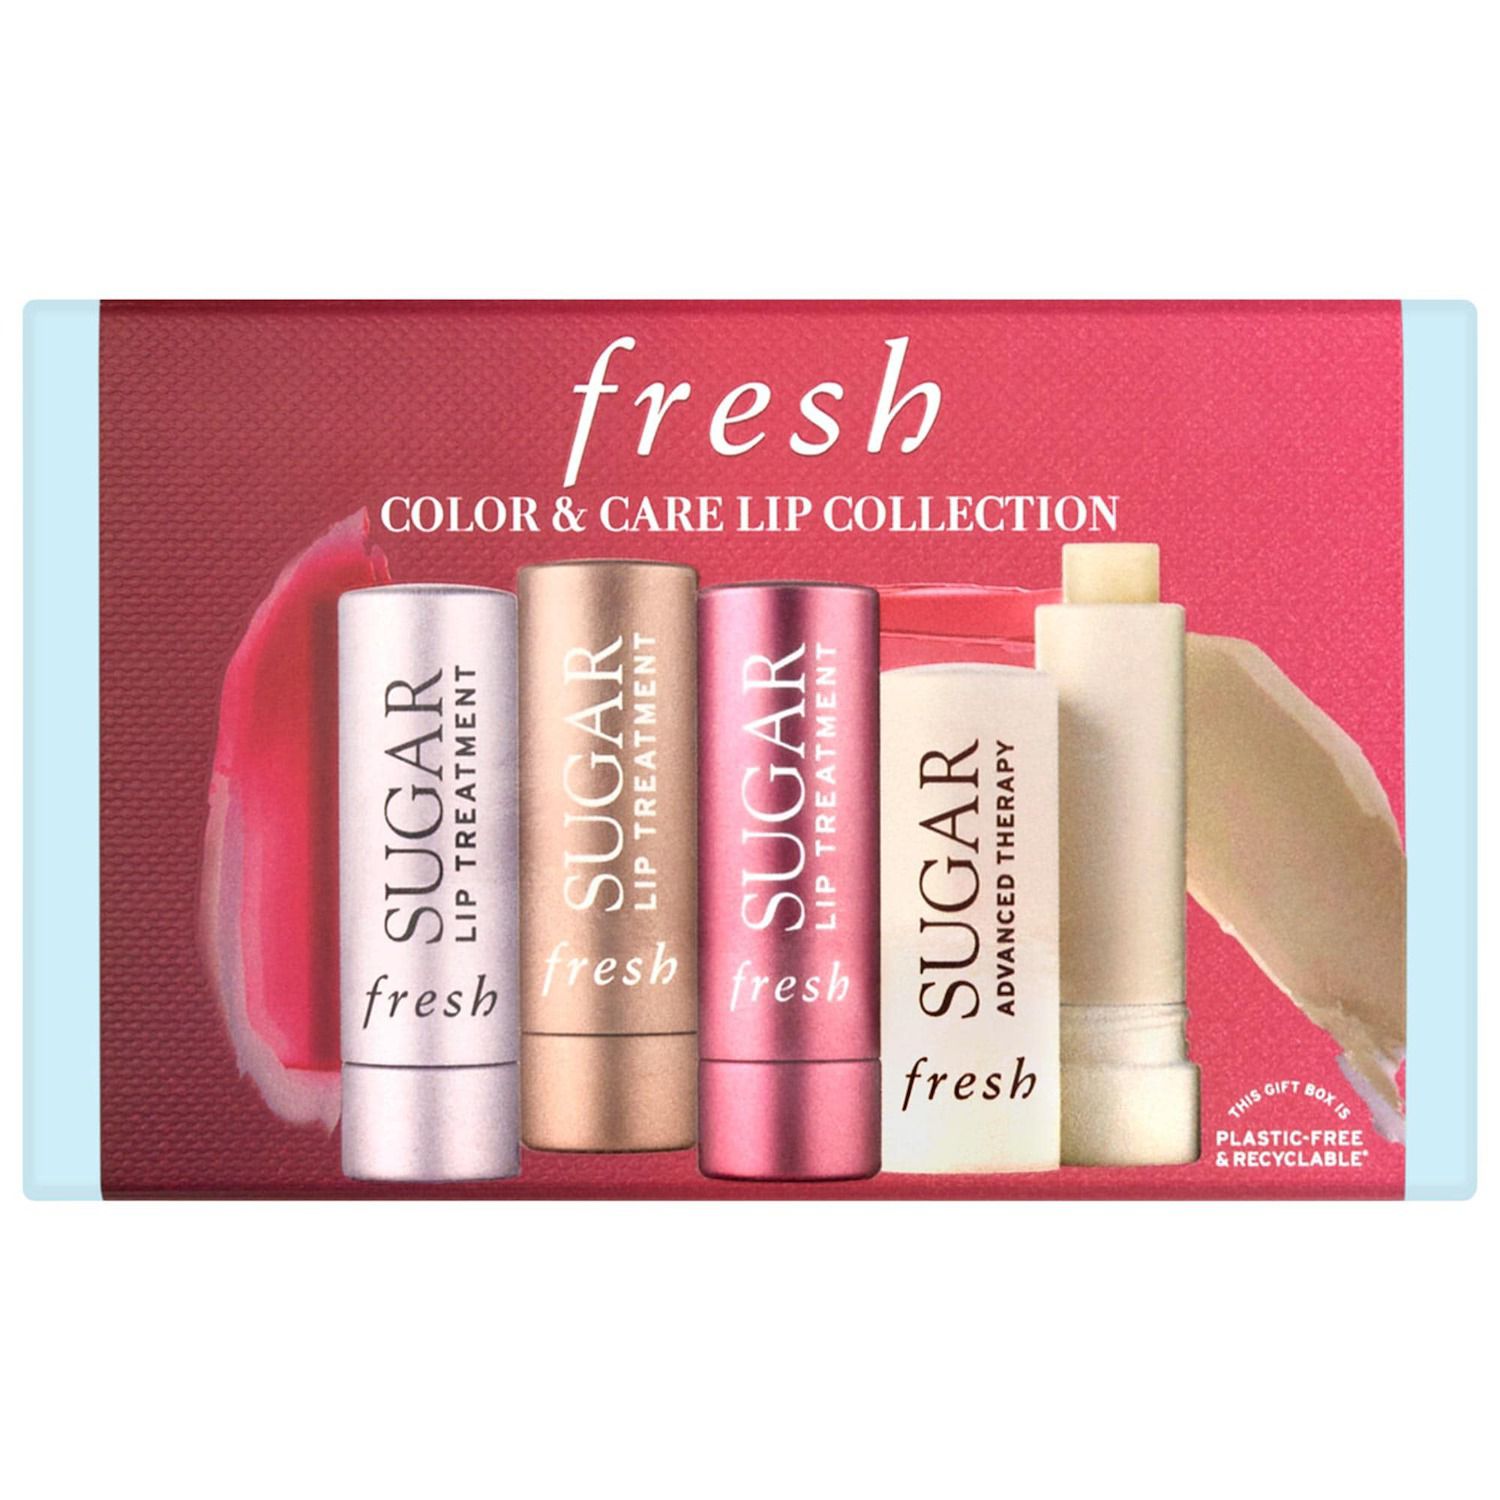 The Freshly Sugared Rogue: Exploring New Lip Balm Frontiers with